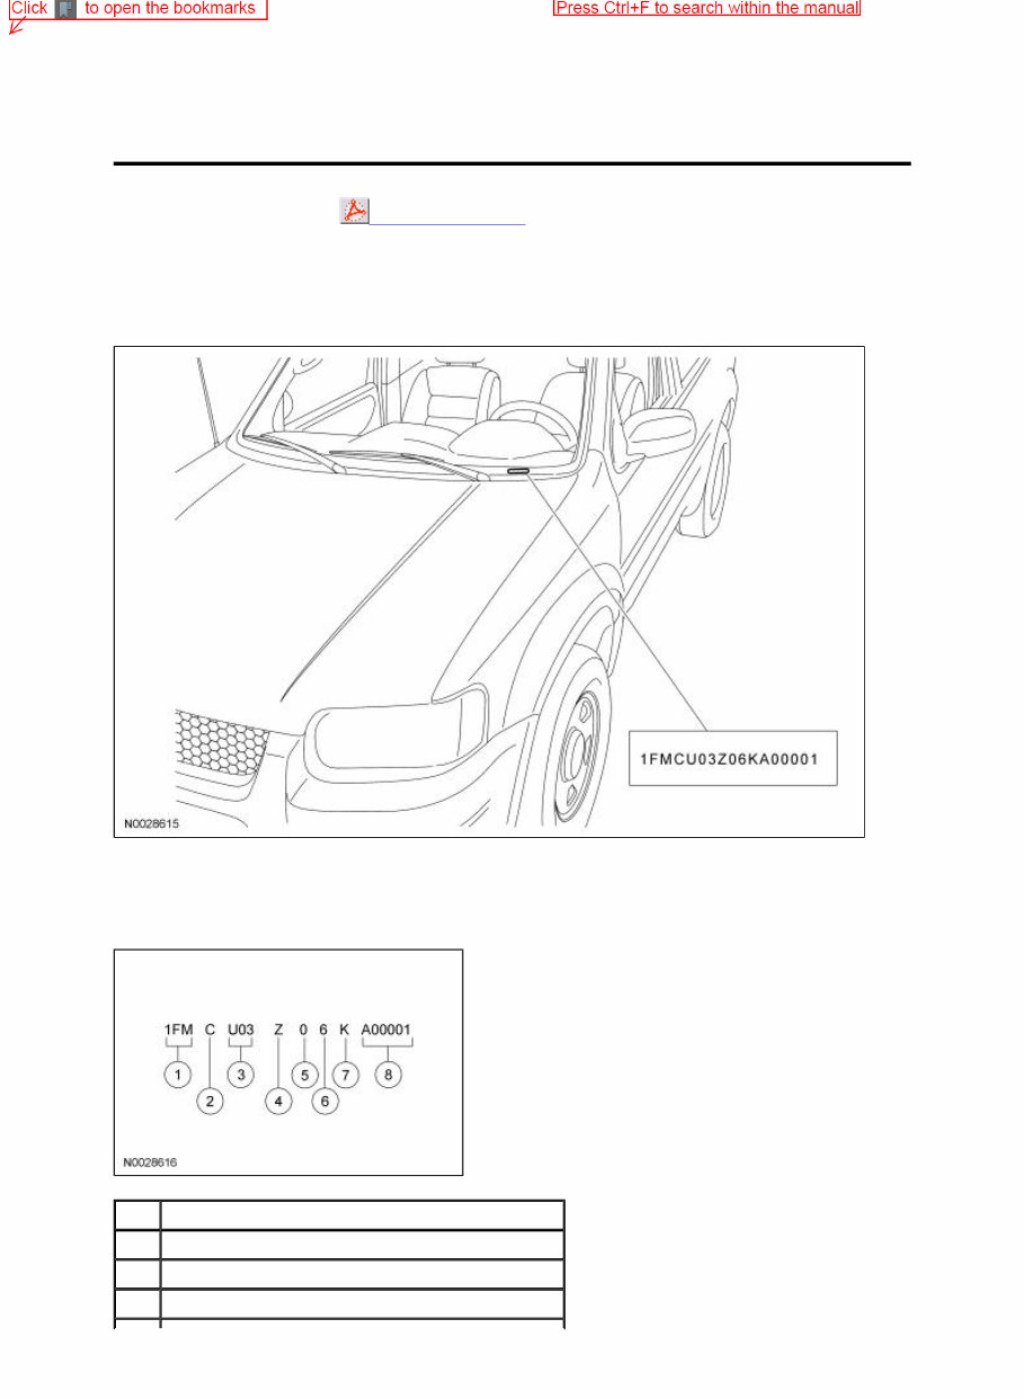 Picture of: Ford Escape  Repair Service Manual  Manuals Online